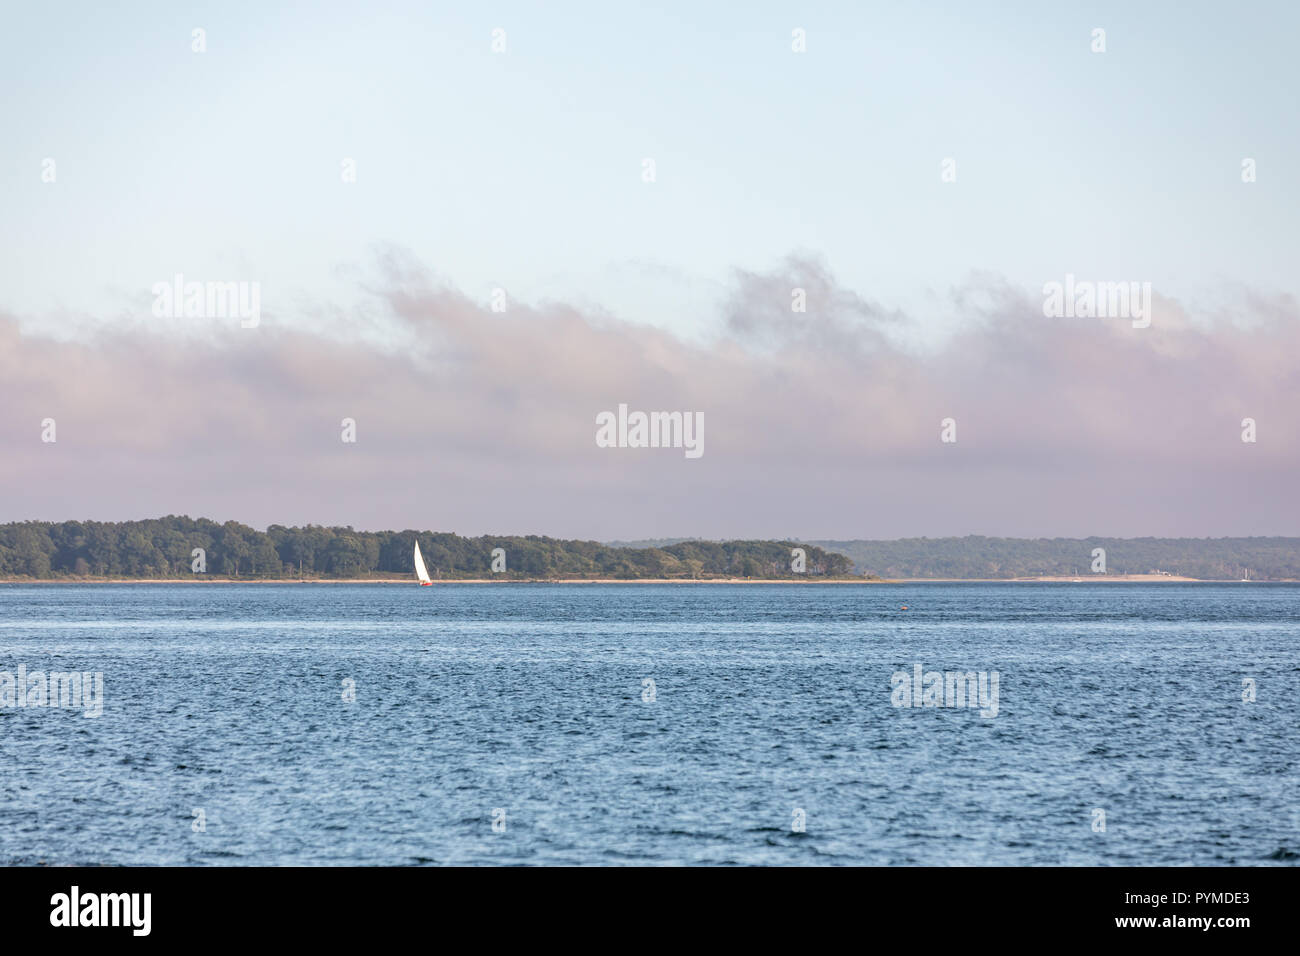 A single sail boat sailing in Sag Harbor Bay with Shelter Island in the background Stock Photo